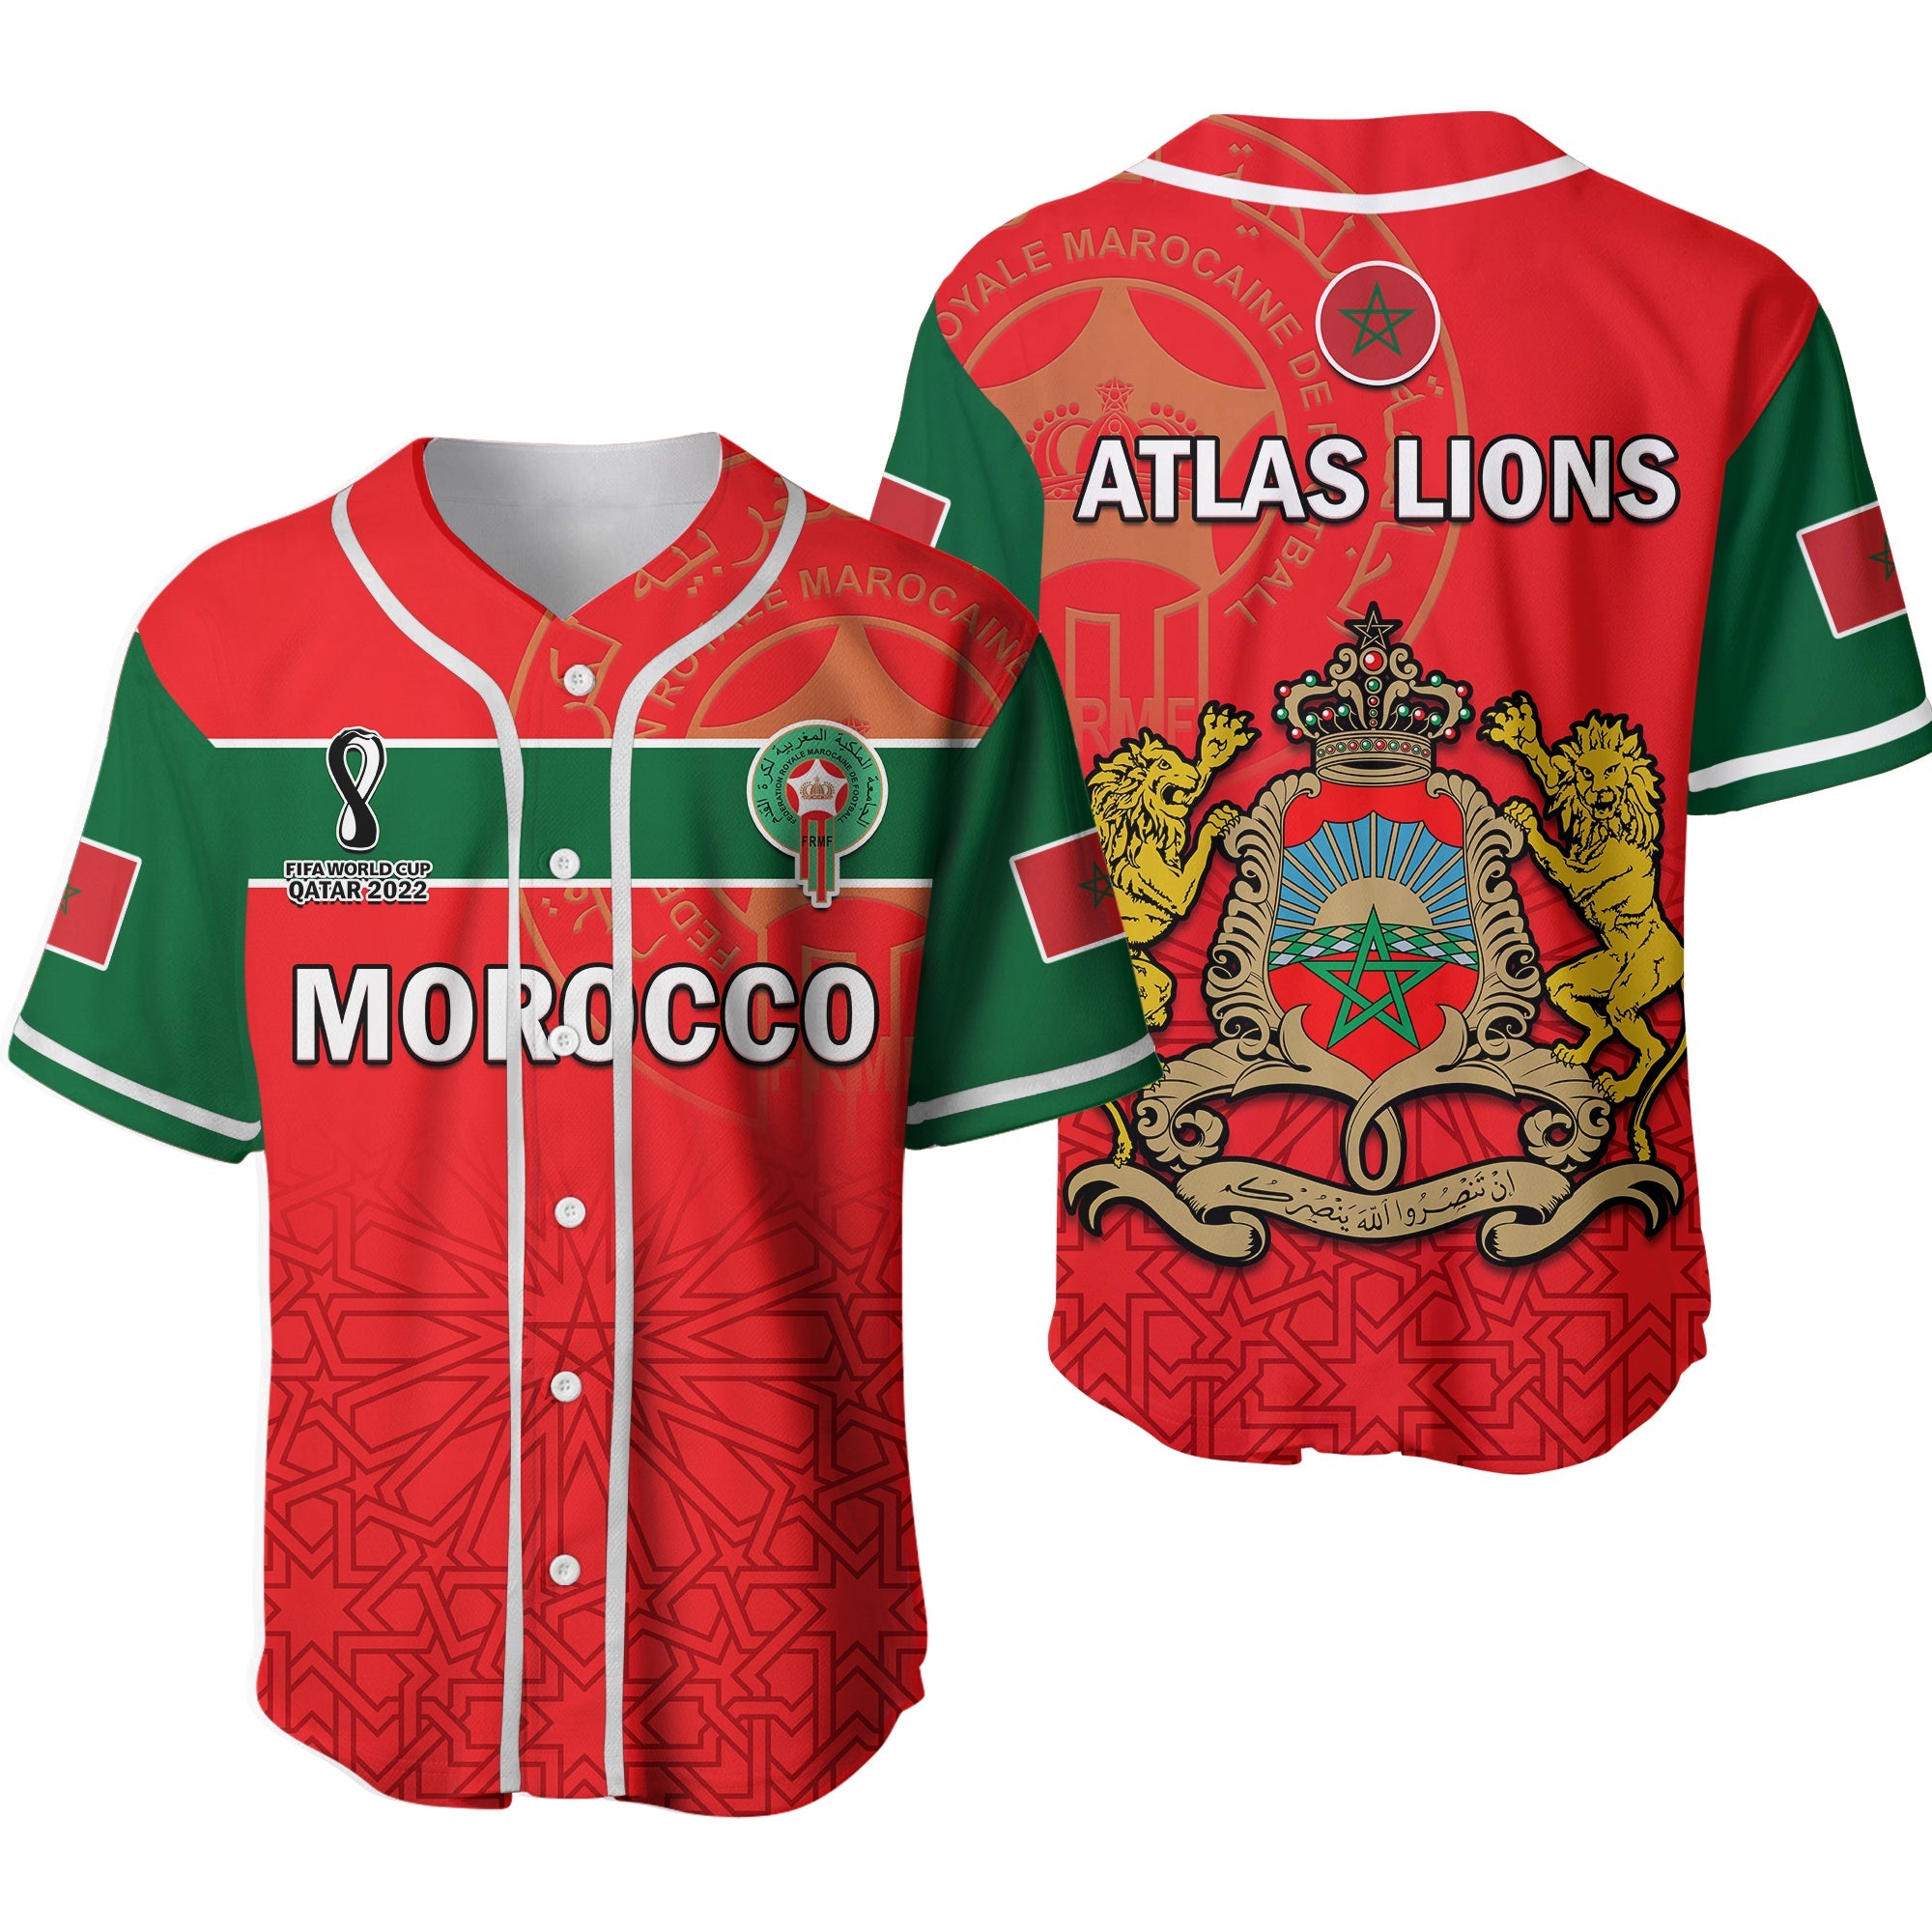 morocco-football-baseball-jersey-atlas-lions-red-world-cup-2022-ver02